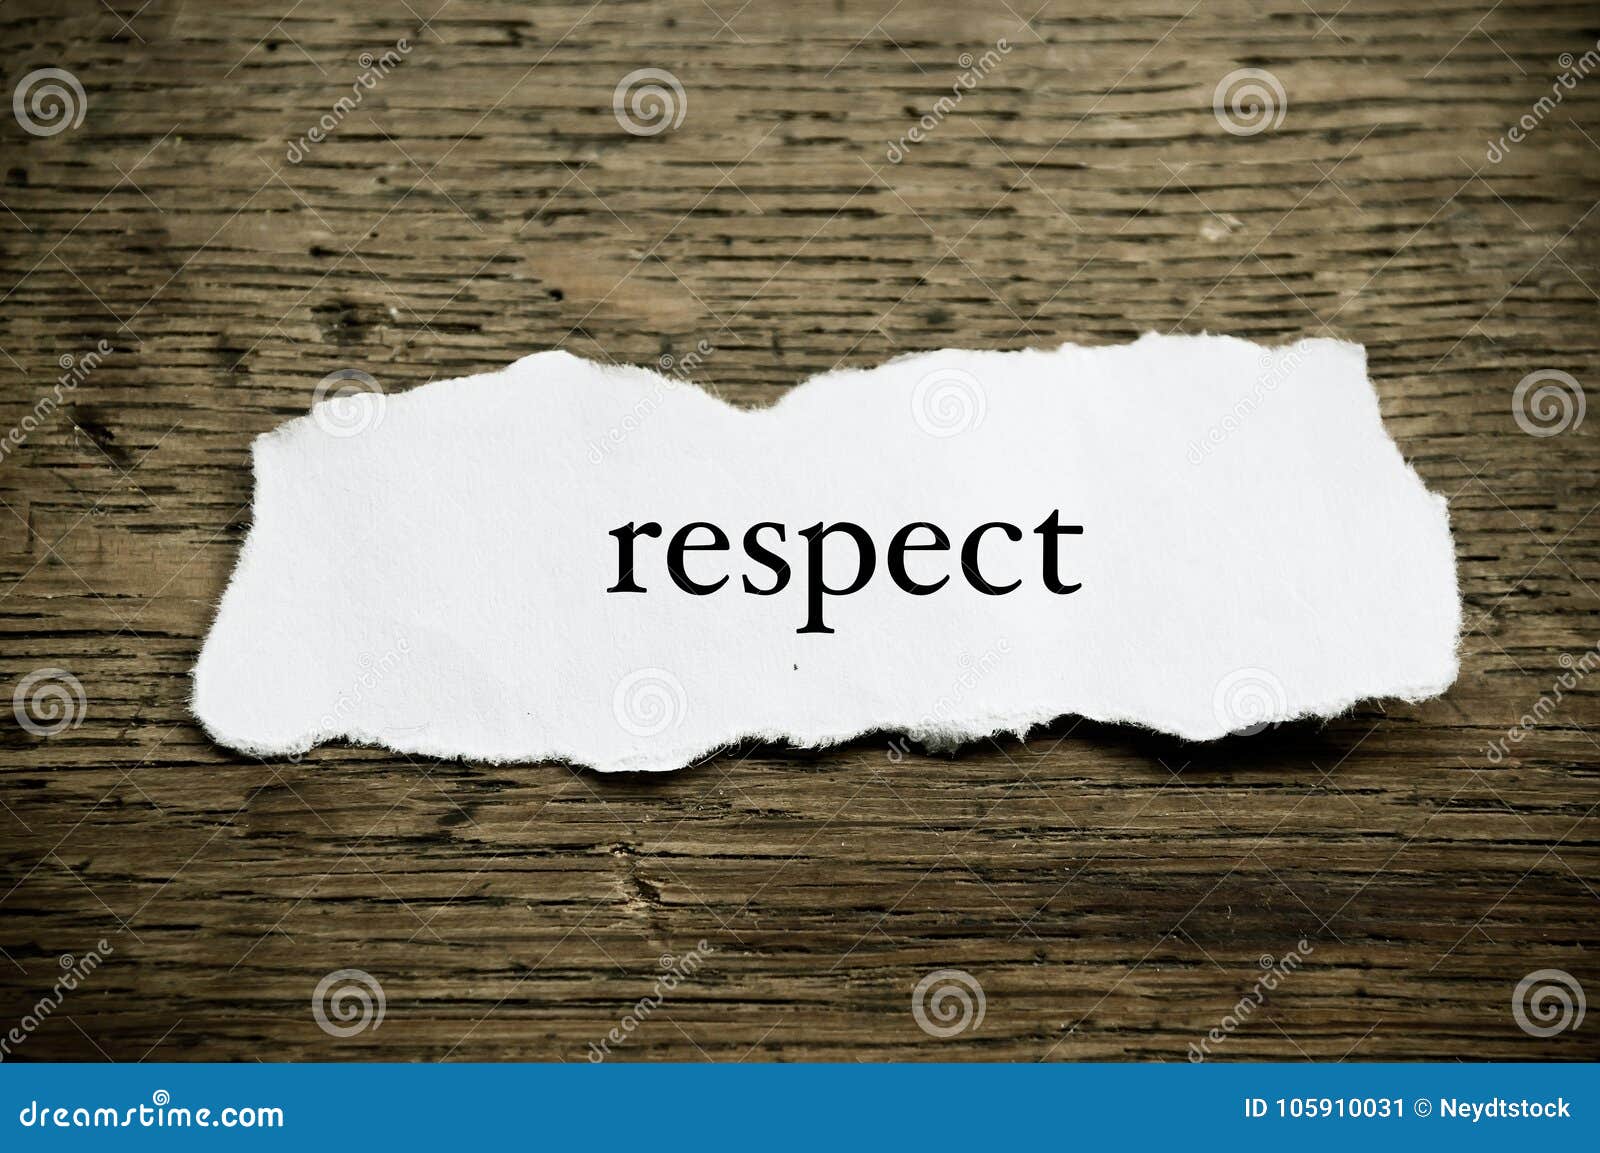 Paper on respect